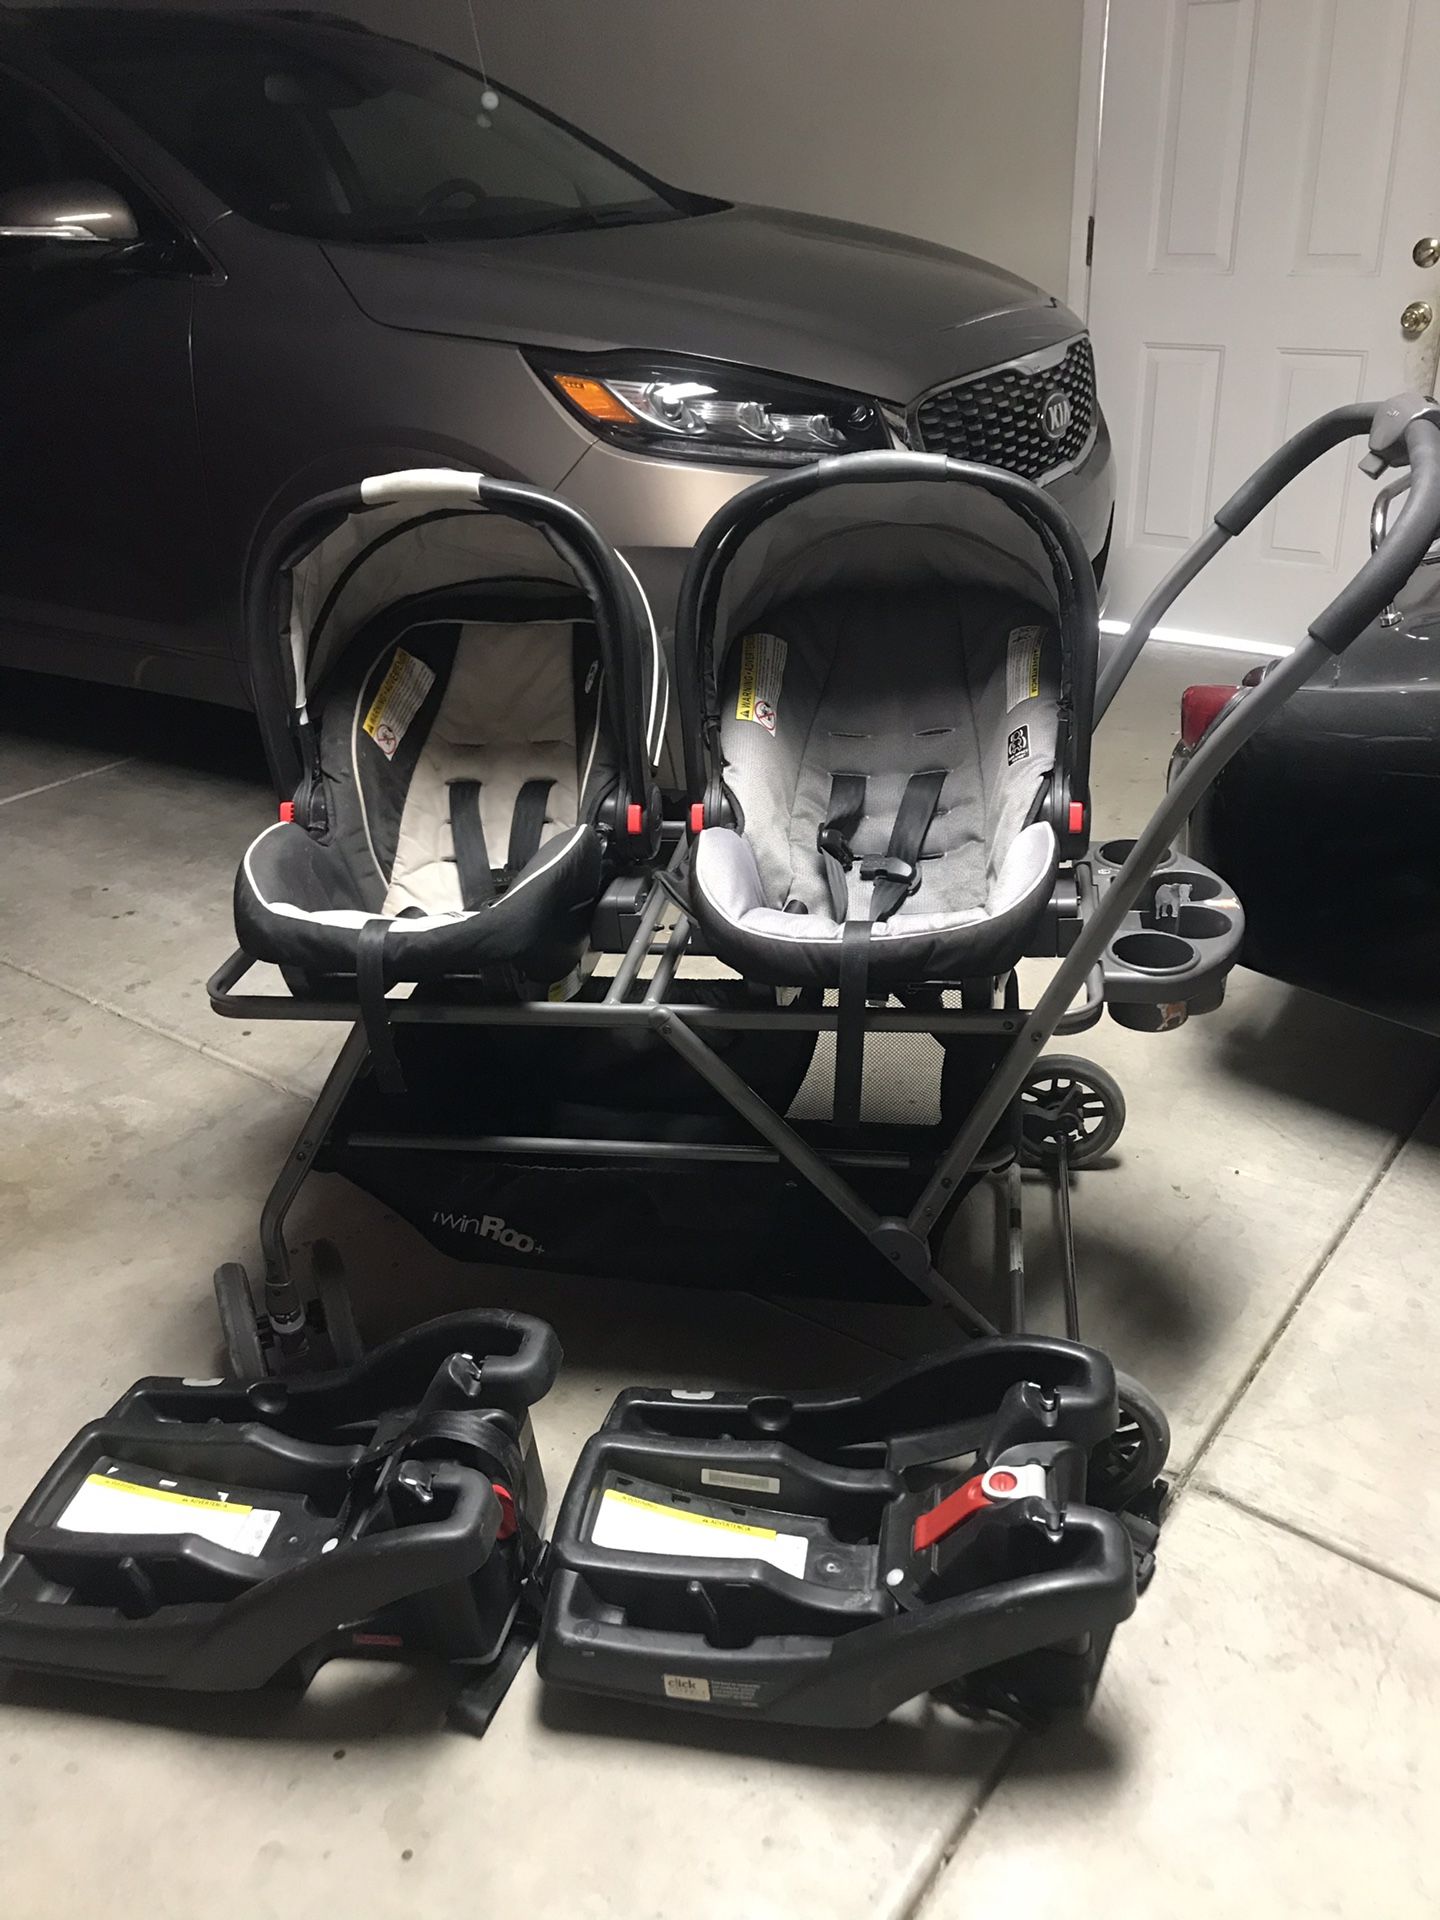 TwinRoo travel system